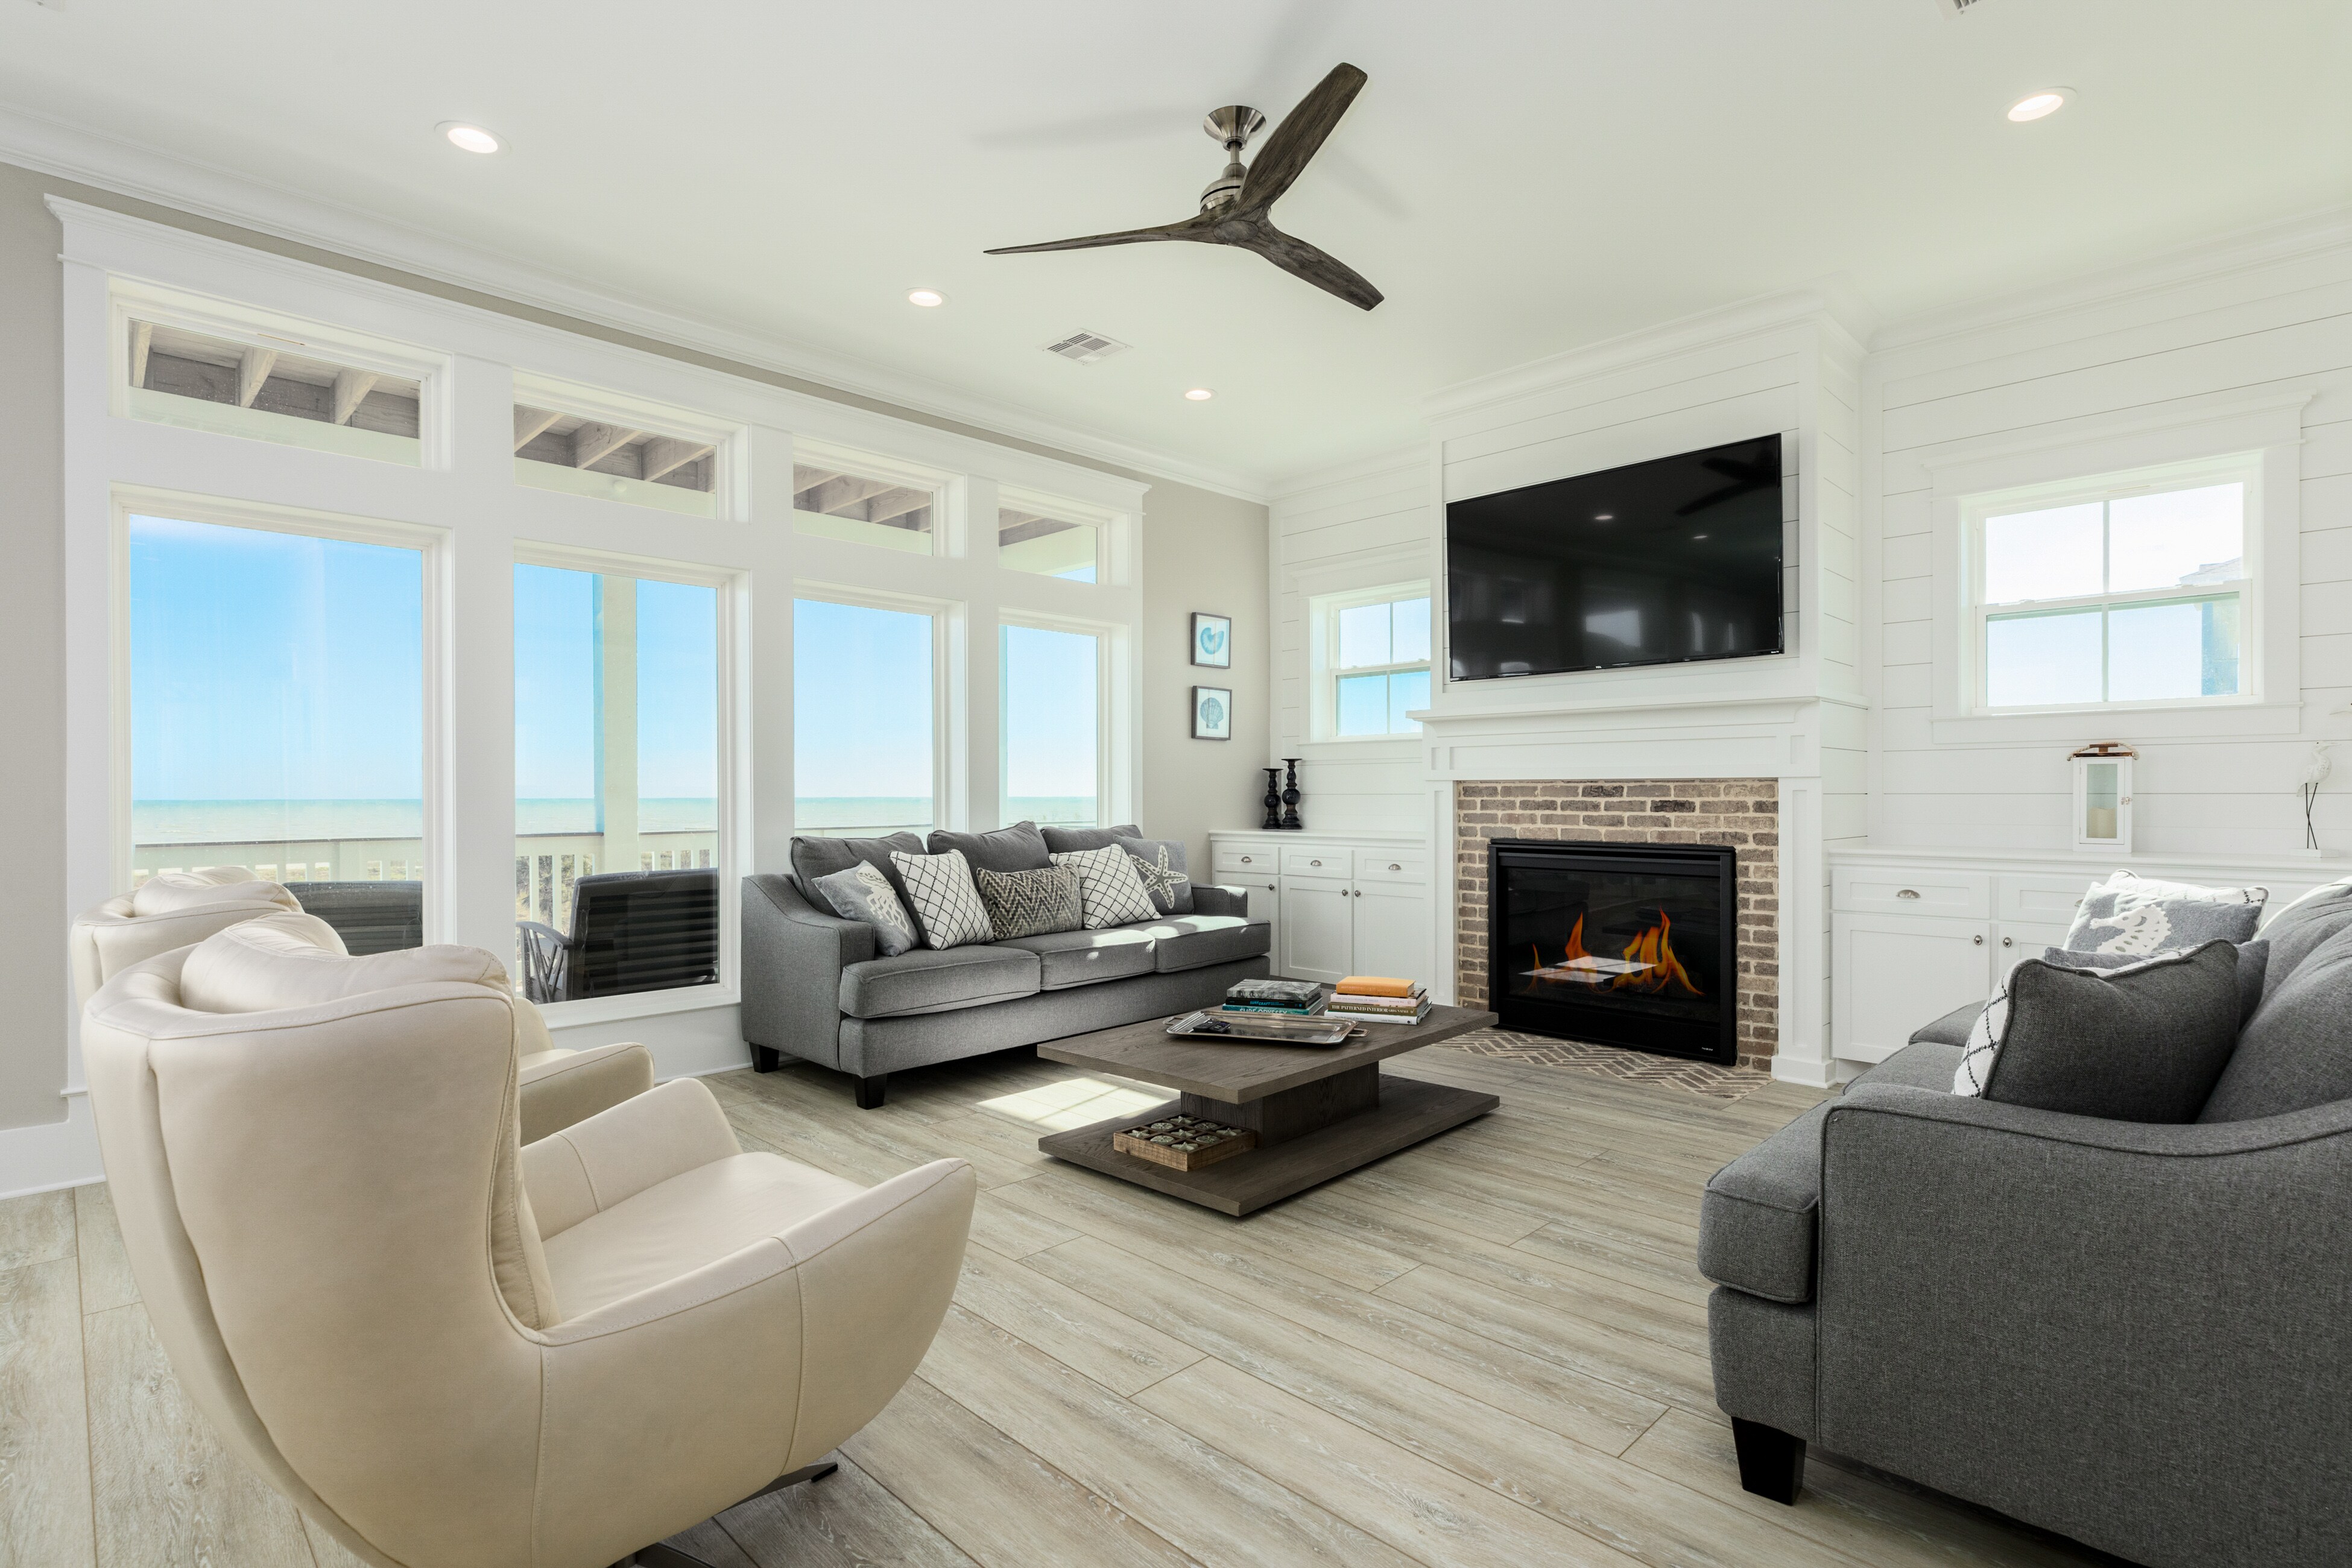 The window-lined living room features a gas fireplace and a 65" TV.